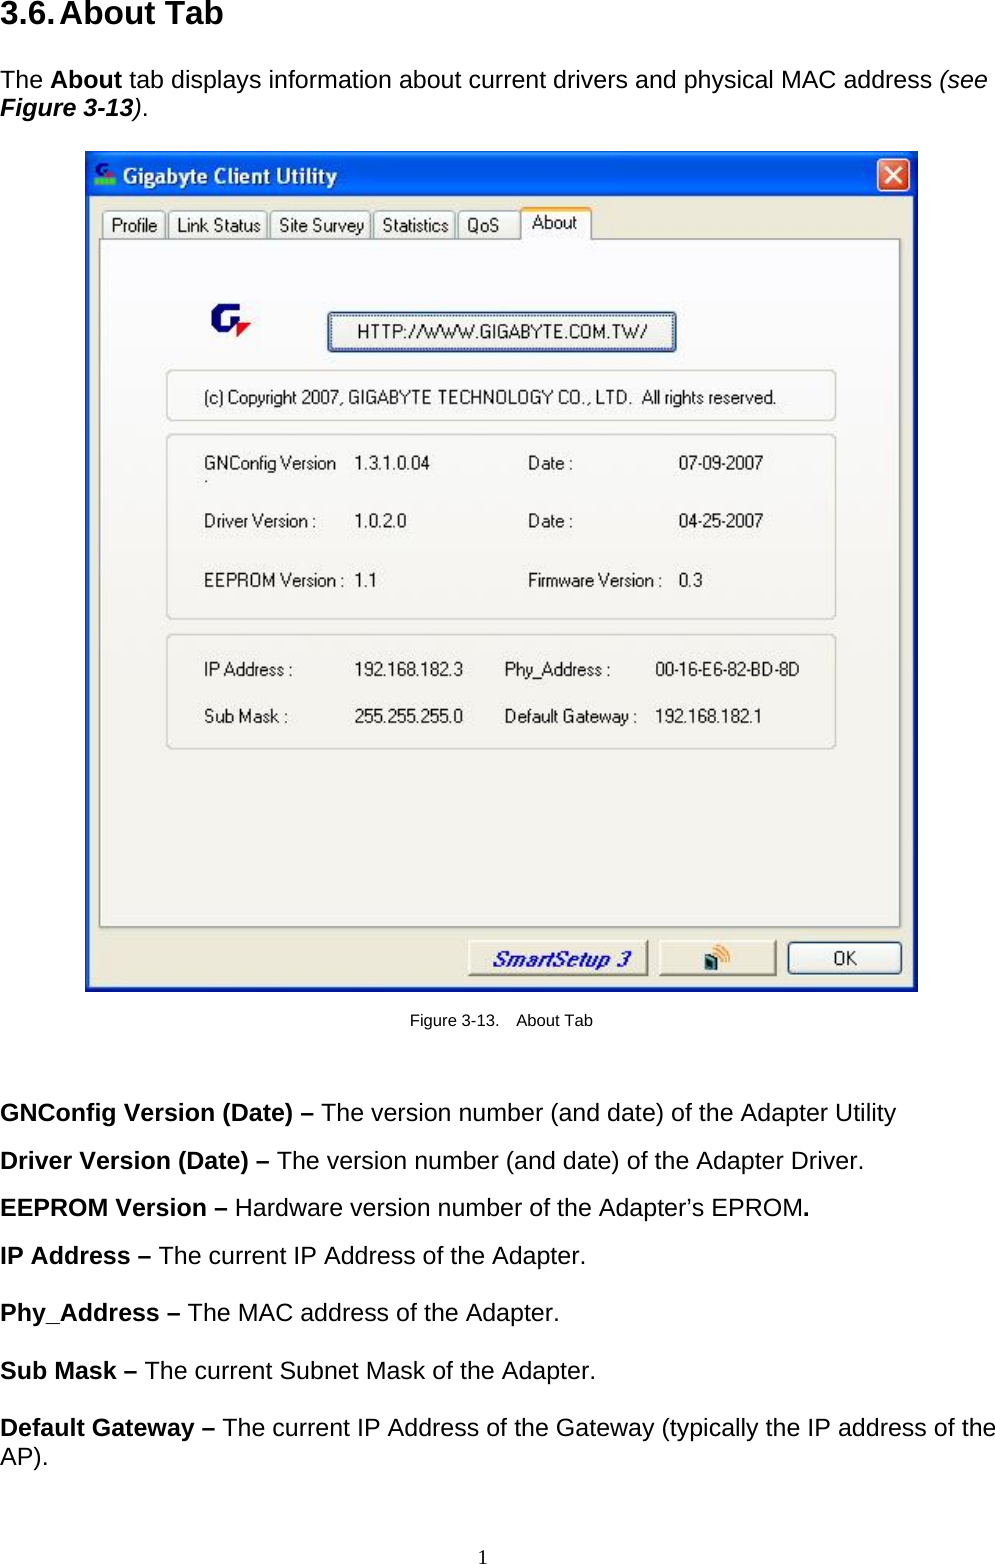 1   3.6. About  Tab  The About tab displays information about current drivers and physical MAC address (see Figure 3-13).    Figure 3-13.  About Tab  GNConfig Version (Date) – The version number (and date) of the Adapter Utility  Driver Version (Date) – The version number (and date) of the Adapter Driver.  EEPROM Version – Hardware version number of the Adapter’s EPROM.  IP Address – The current IP Address of the Adapter.  Phy_Address – The MAC address of the Adapter.  Sub Mask – The current Subnet Mask of the Adapter.  Default Gateway – The current IP Address of the Gateway (typically the IP address of the AP).  